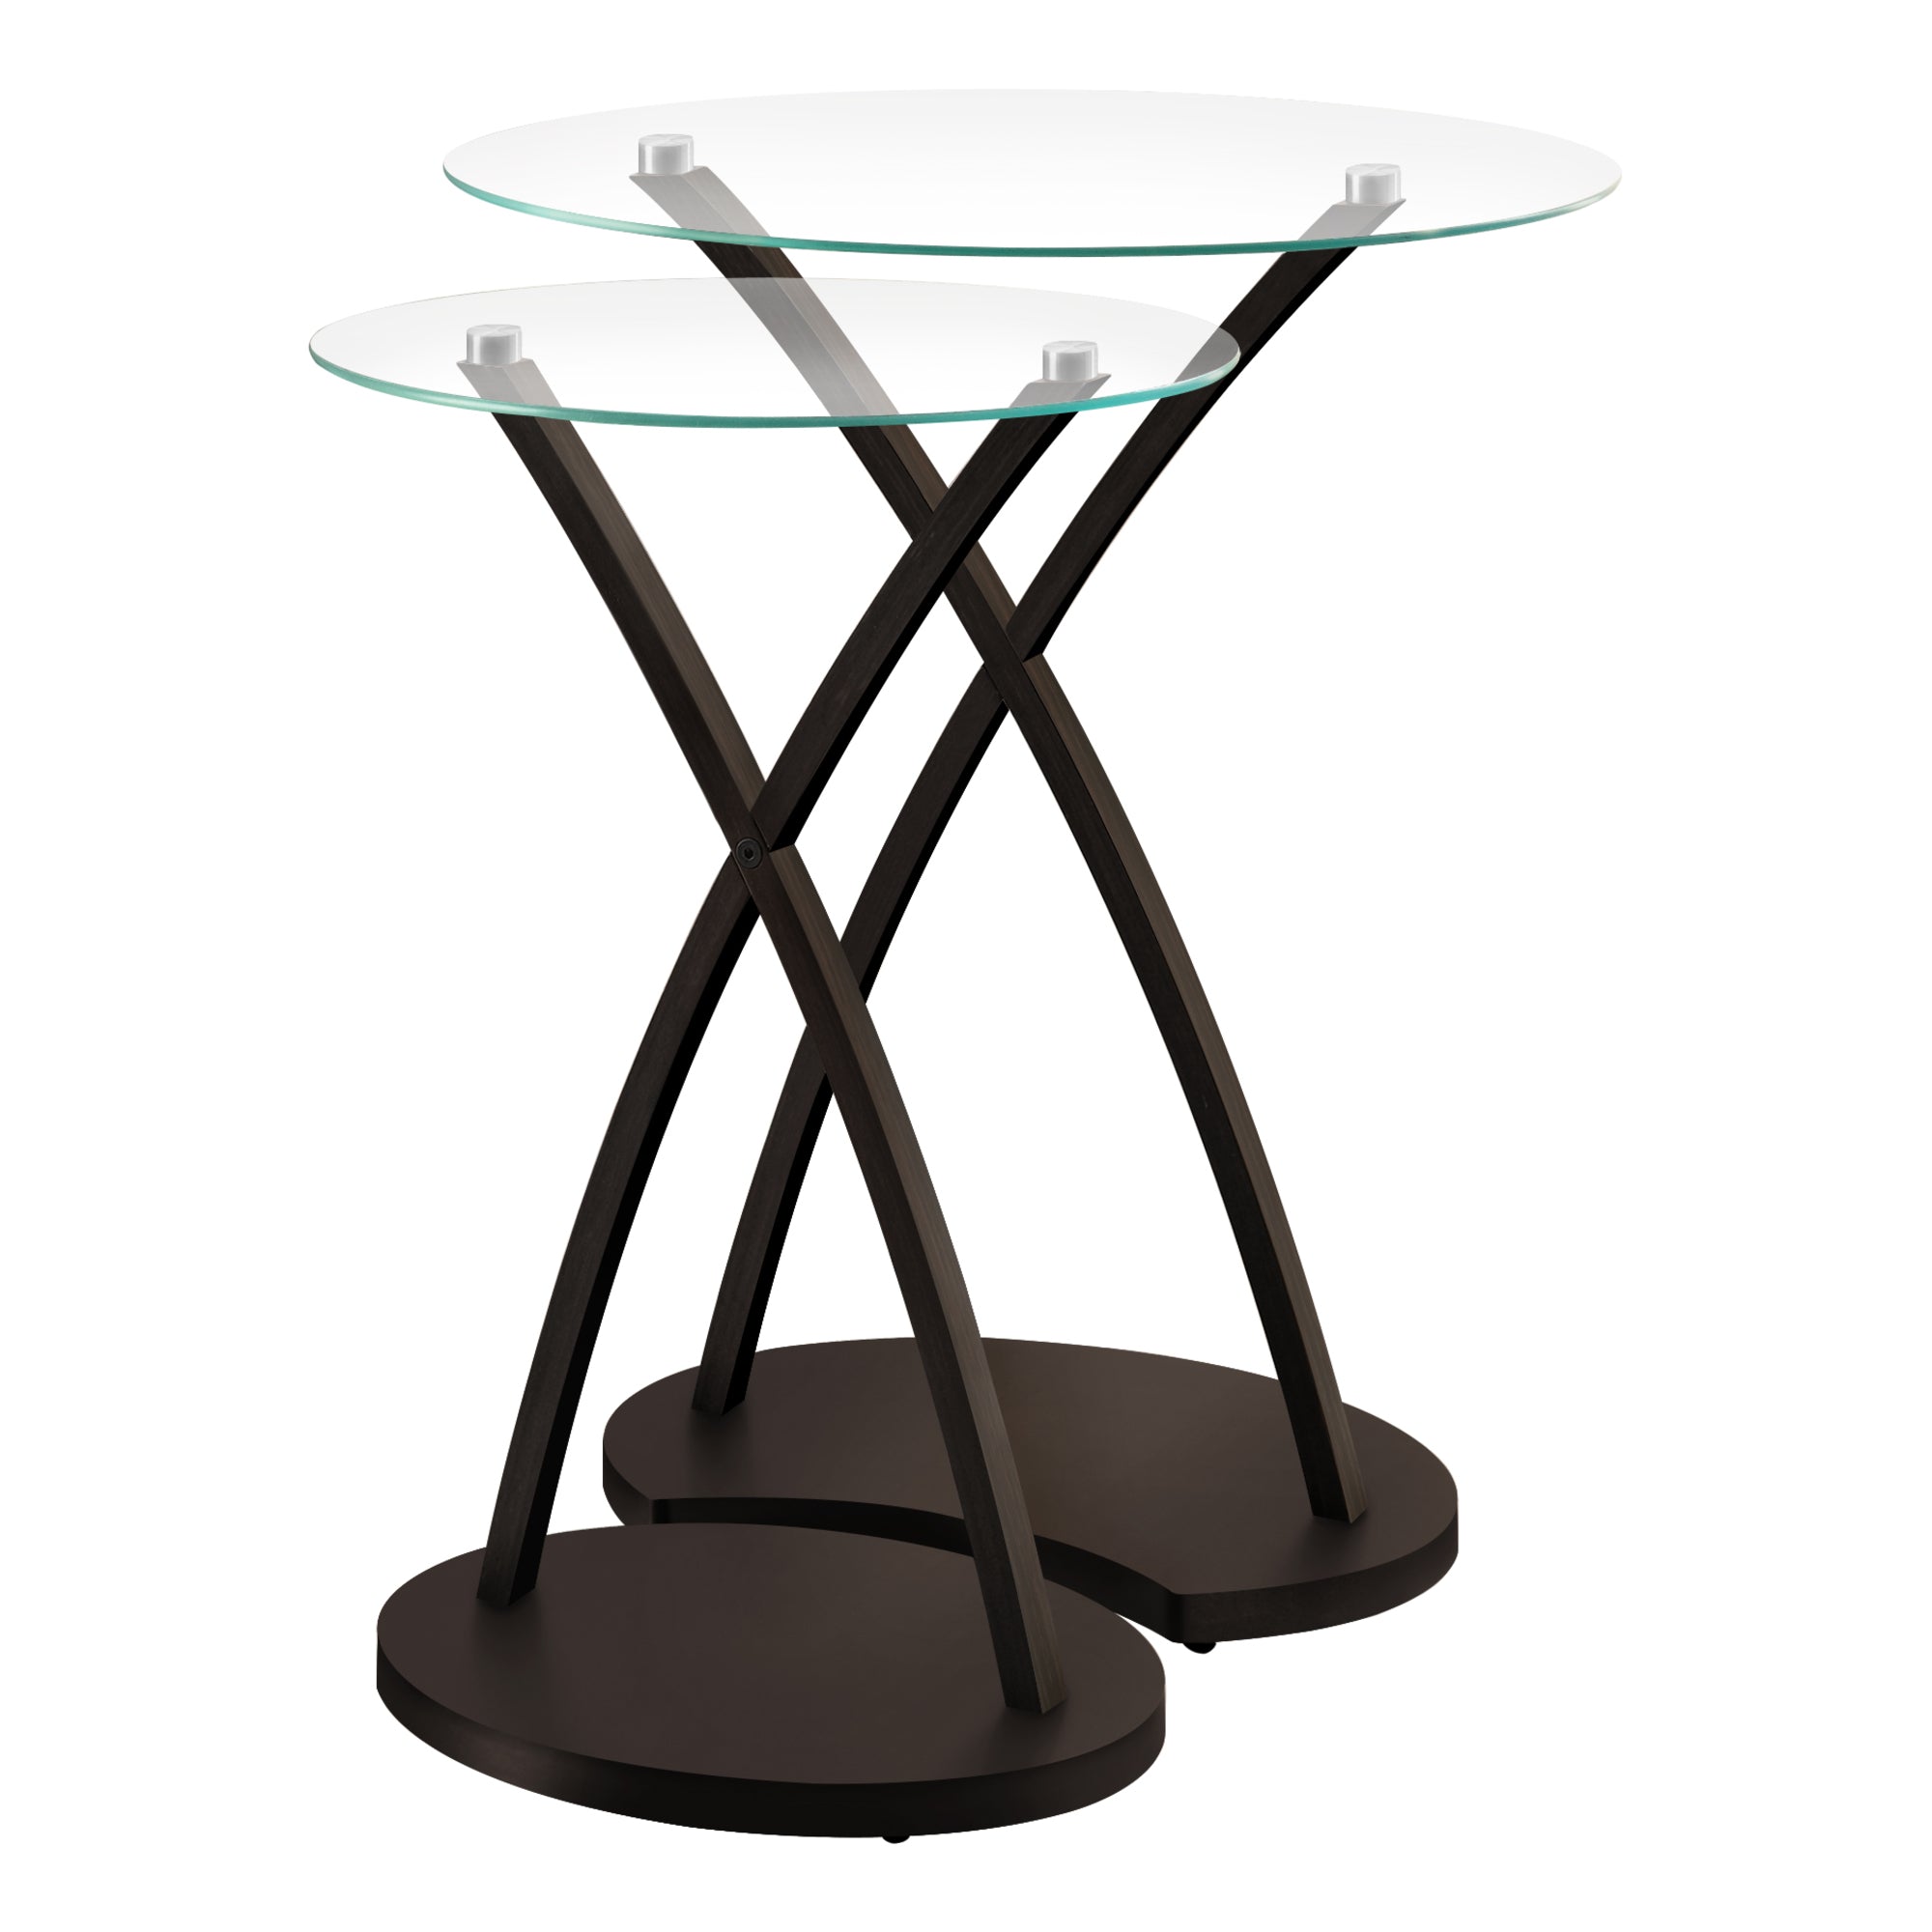 MN-783013    Nesting Table, Set Of 2, Side, End, Tempered Glass, Accent, Living Room, Bedroom, Solid Wood, Tempered Glass, Dark Brown, Clear, Contemporary, Modern